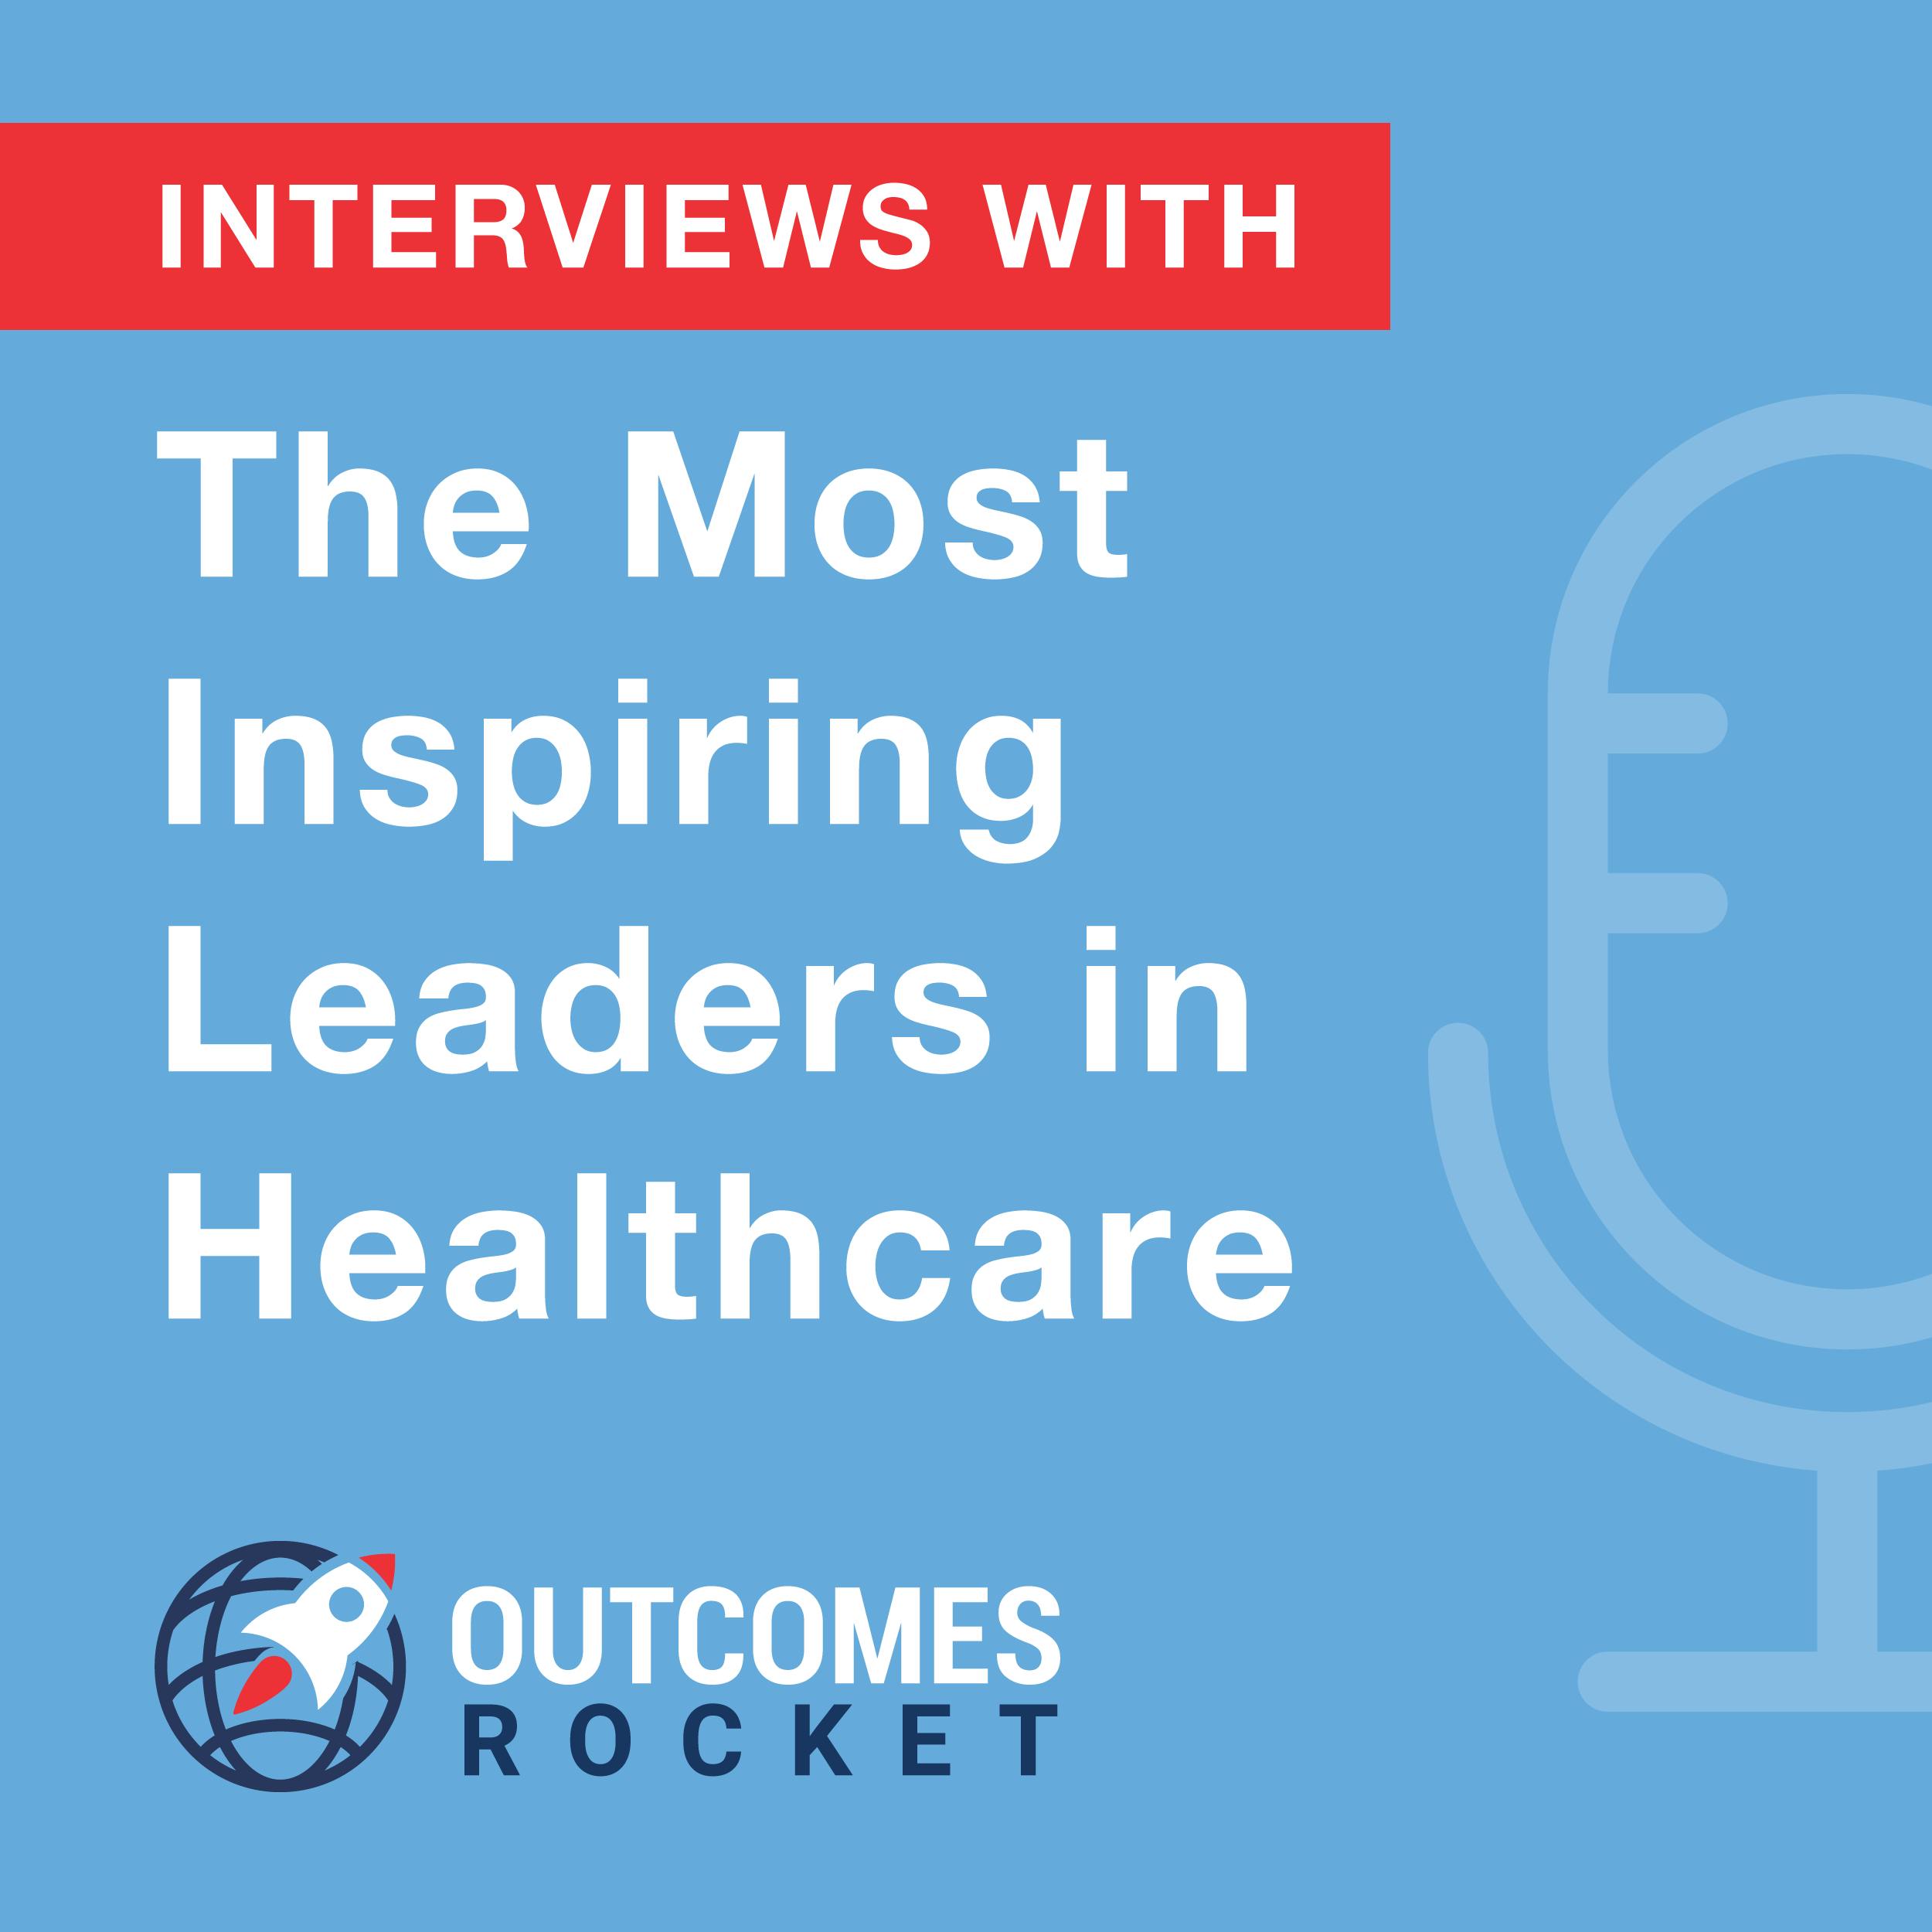 Why Continuity of Care Became a Core Focus for This Leader and How She’s Improving Outcomes with Anne Weiler, CEO and Co-founder at Wellpepper